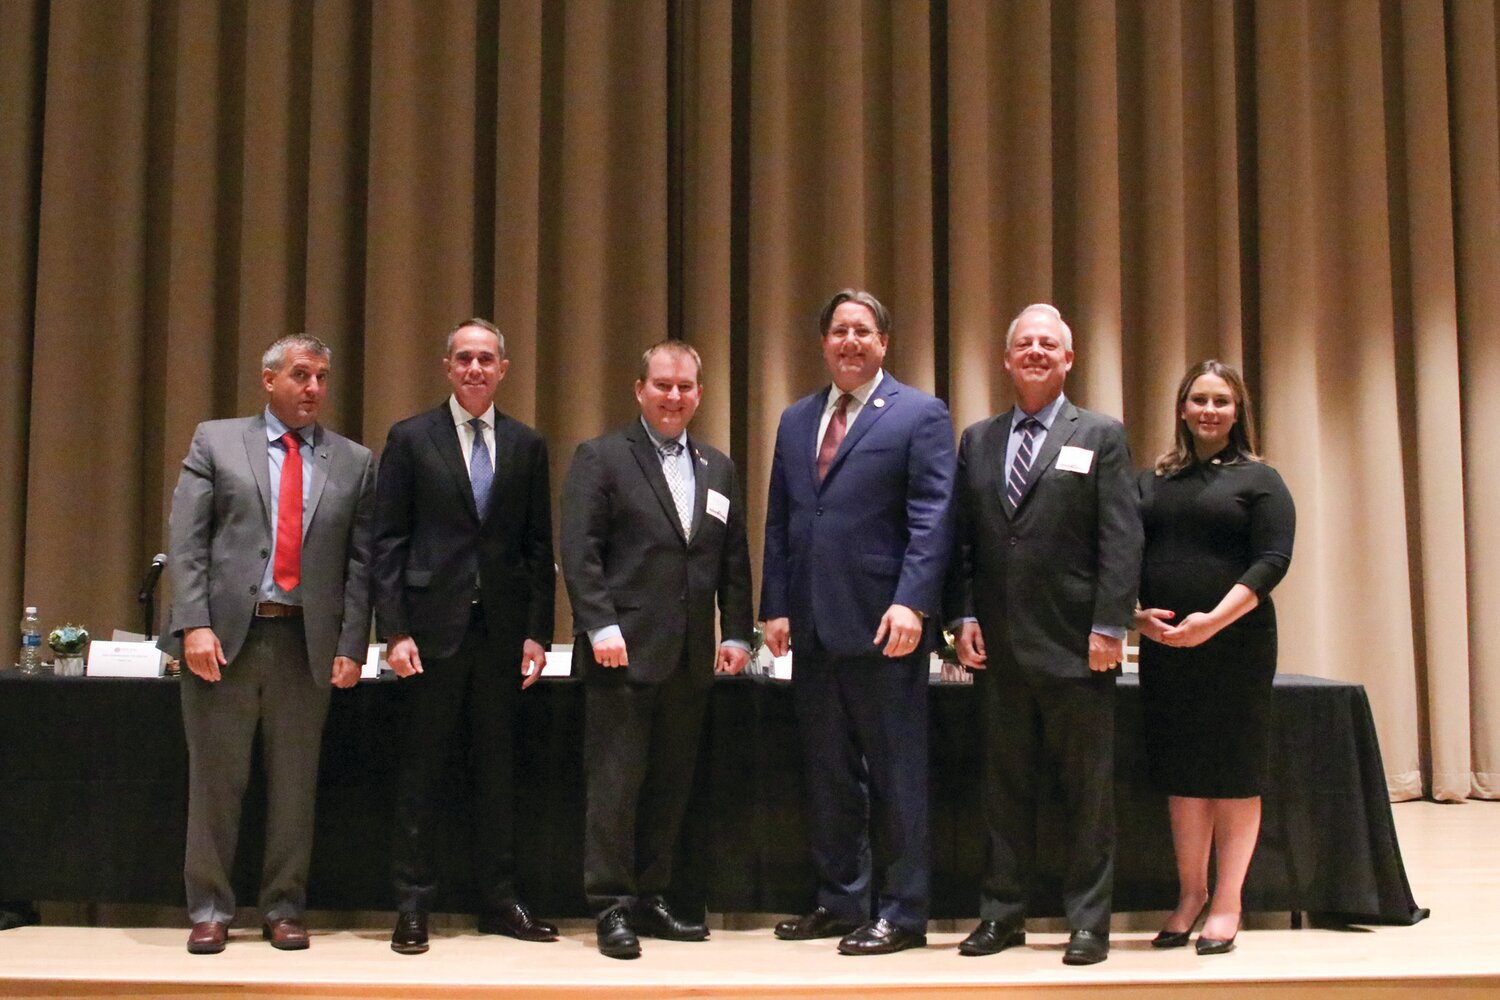 From left, Sen. Frank Farry, R-6, Steve Santarsiero, D-10, Rep. Brian Munroe, D-144, Rep. Tim Brennan, D-29, Rep. Perry Warren, D-31, and Rep. Shelby Labs, R-143, took part in a panel discussion on Bucks County economic development.